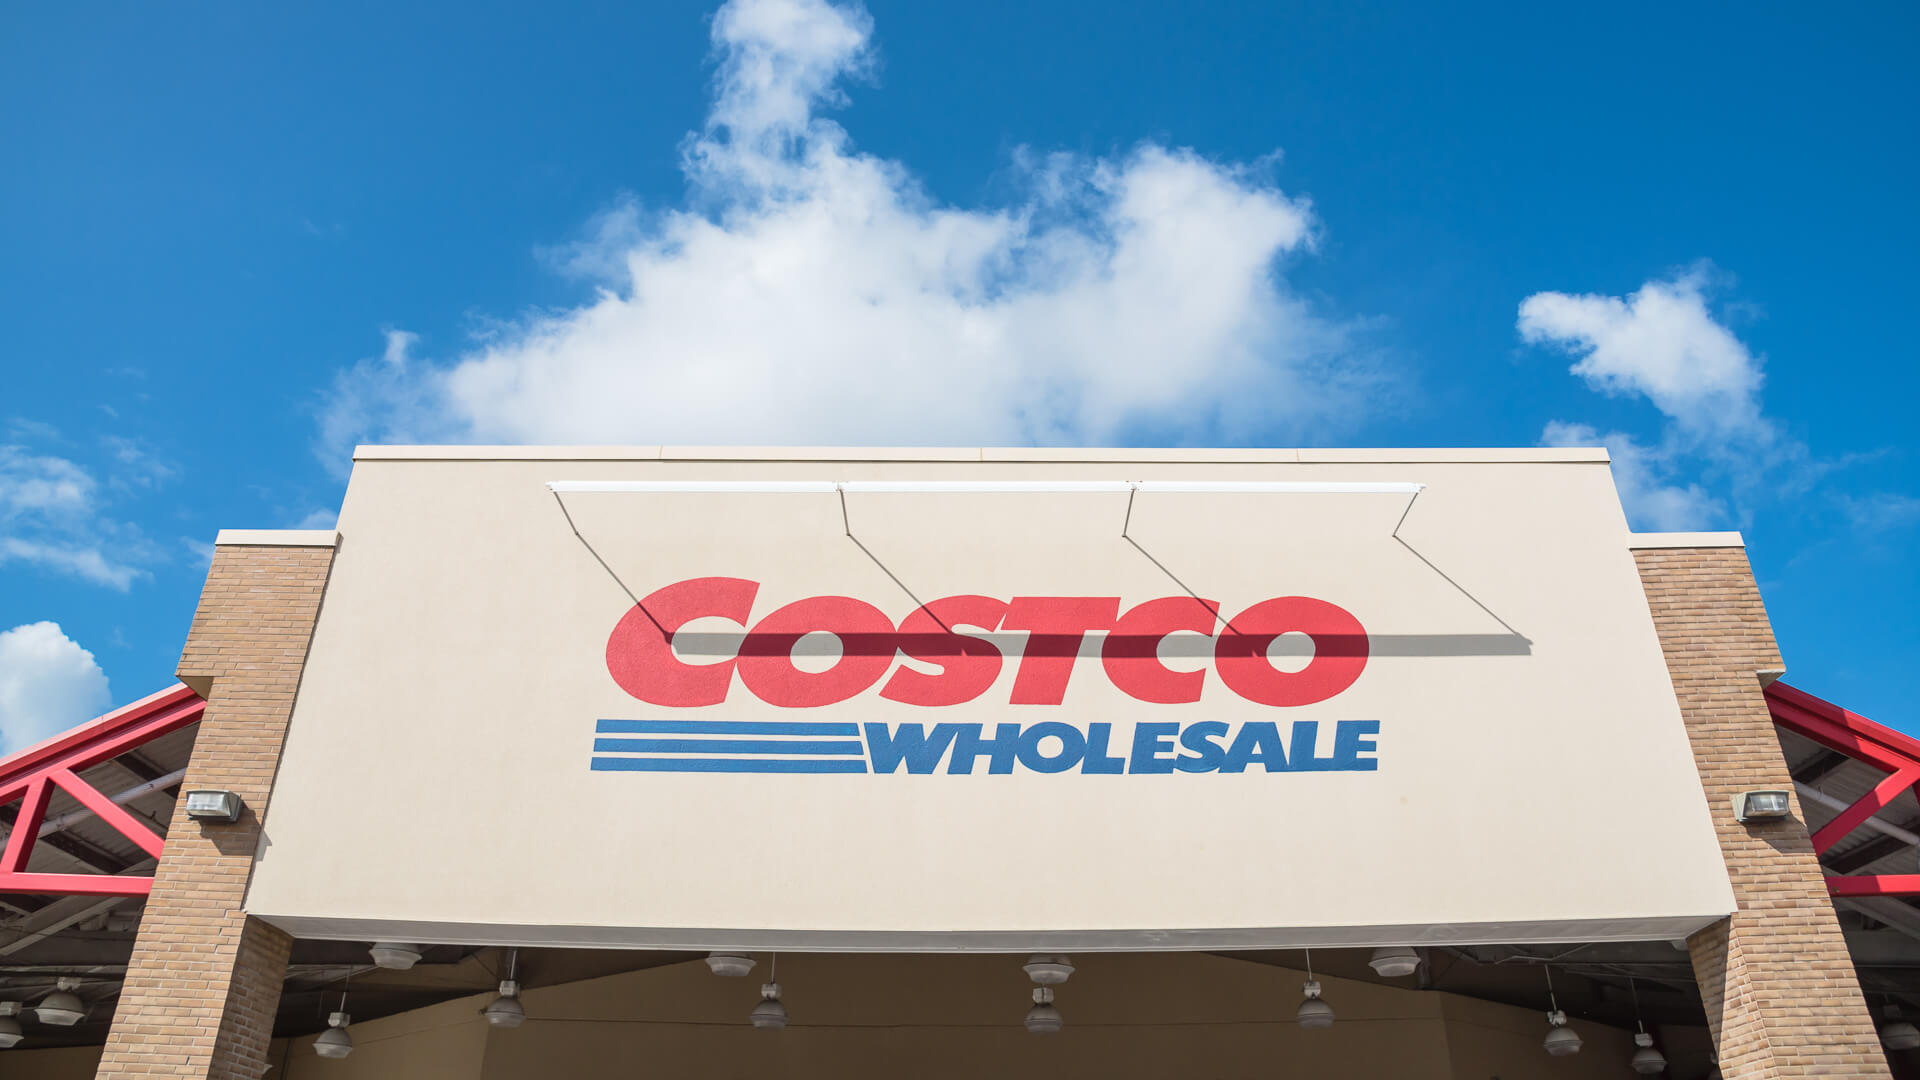 7 Frozen Foods To Stock Up on at Costco for Busy Winter Days